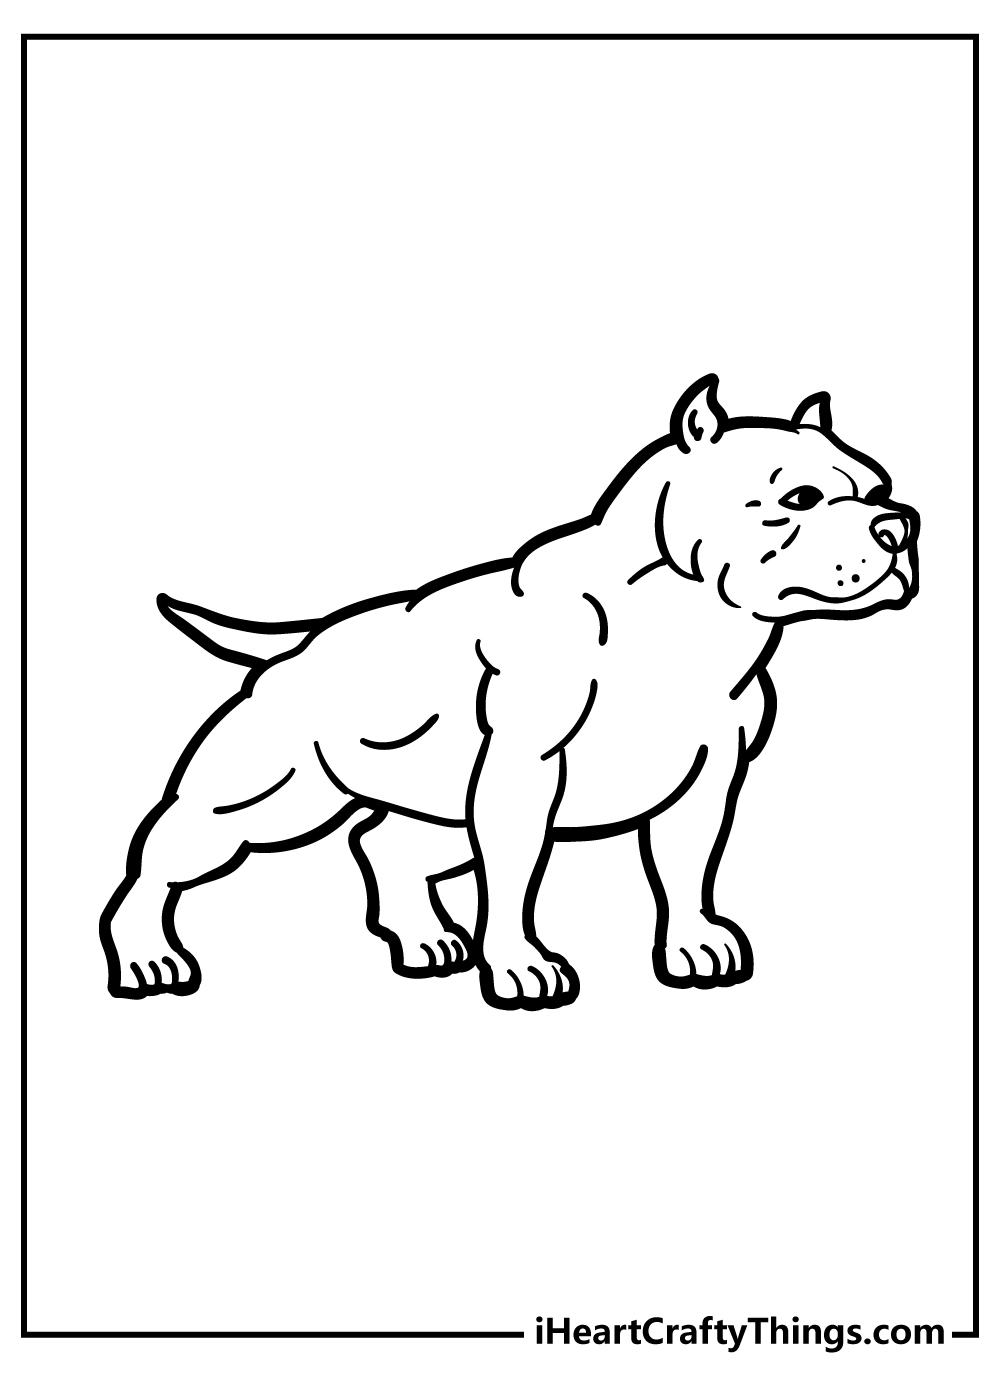 Pitbull Coloring Sheet for children free download